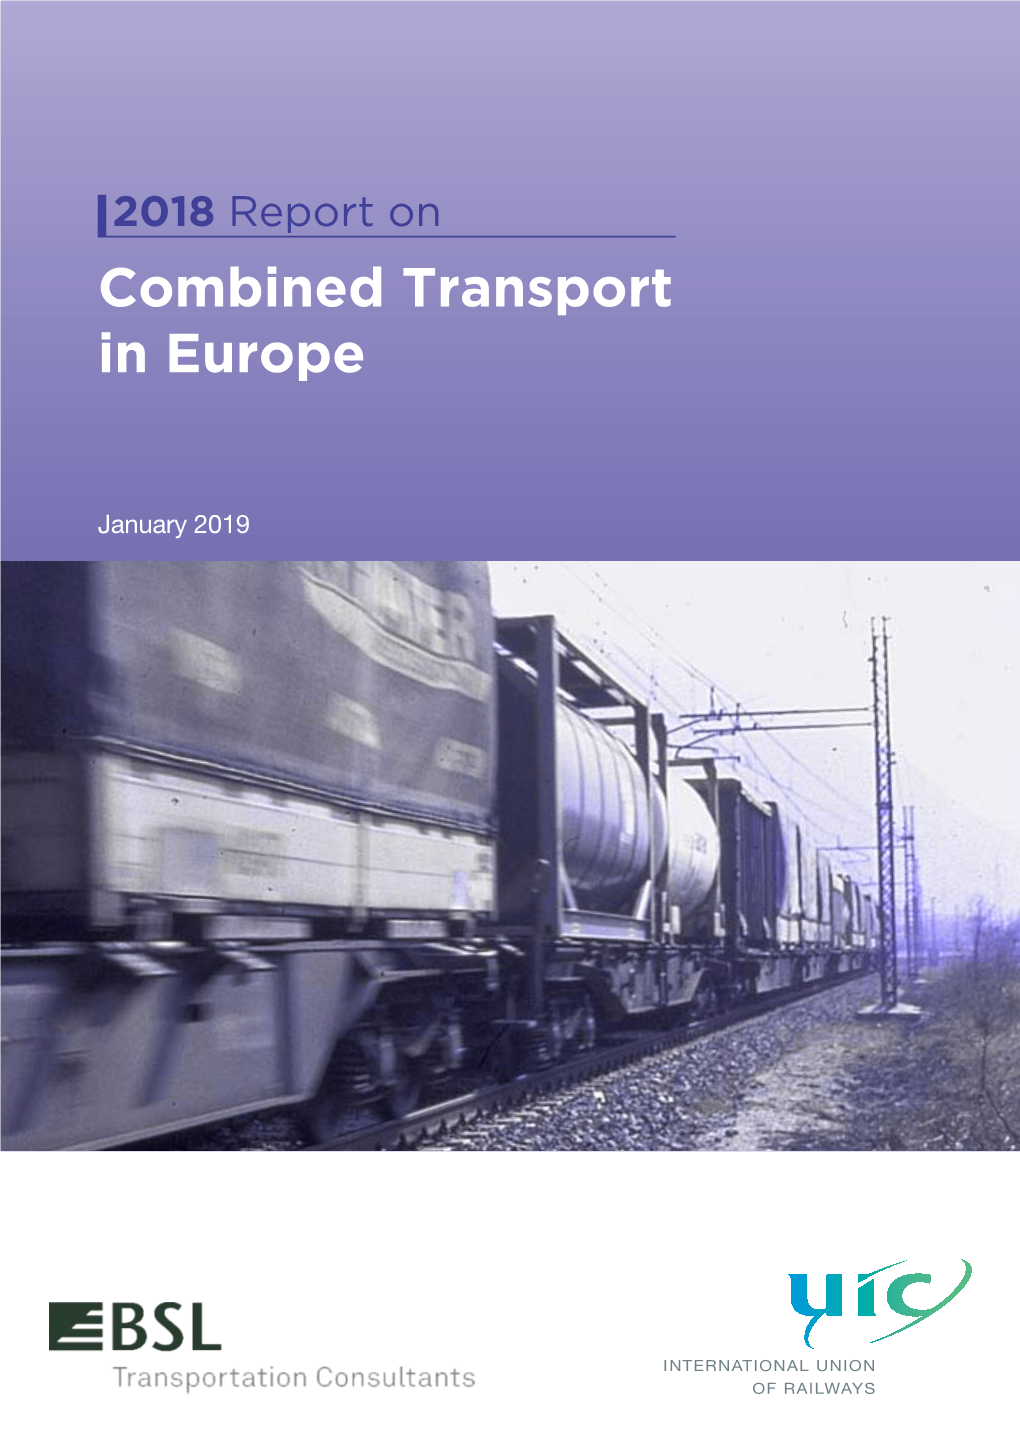 2018 Report on Combined Transport in Europe